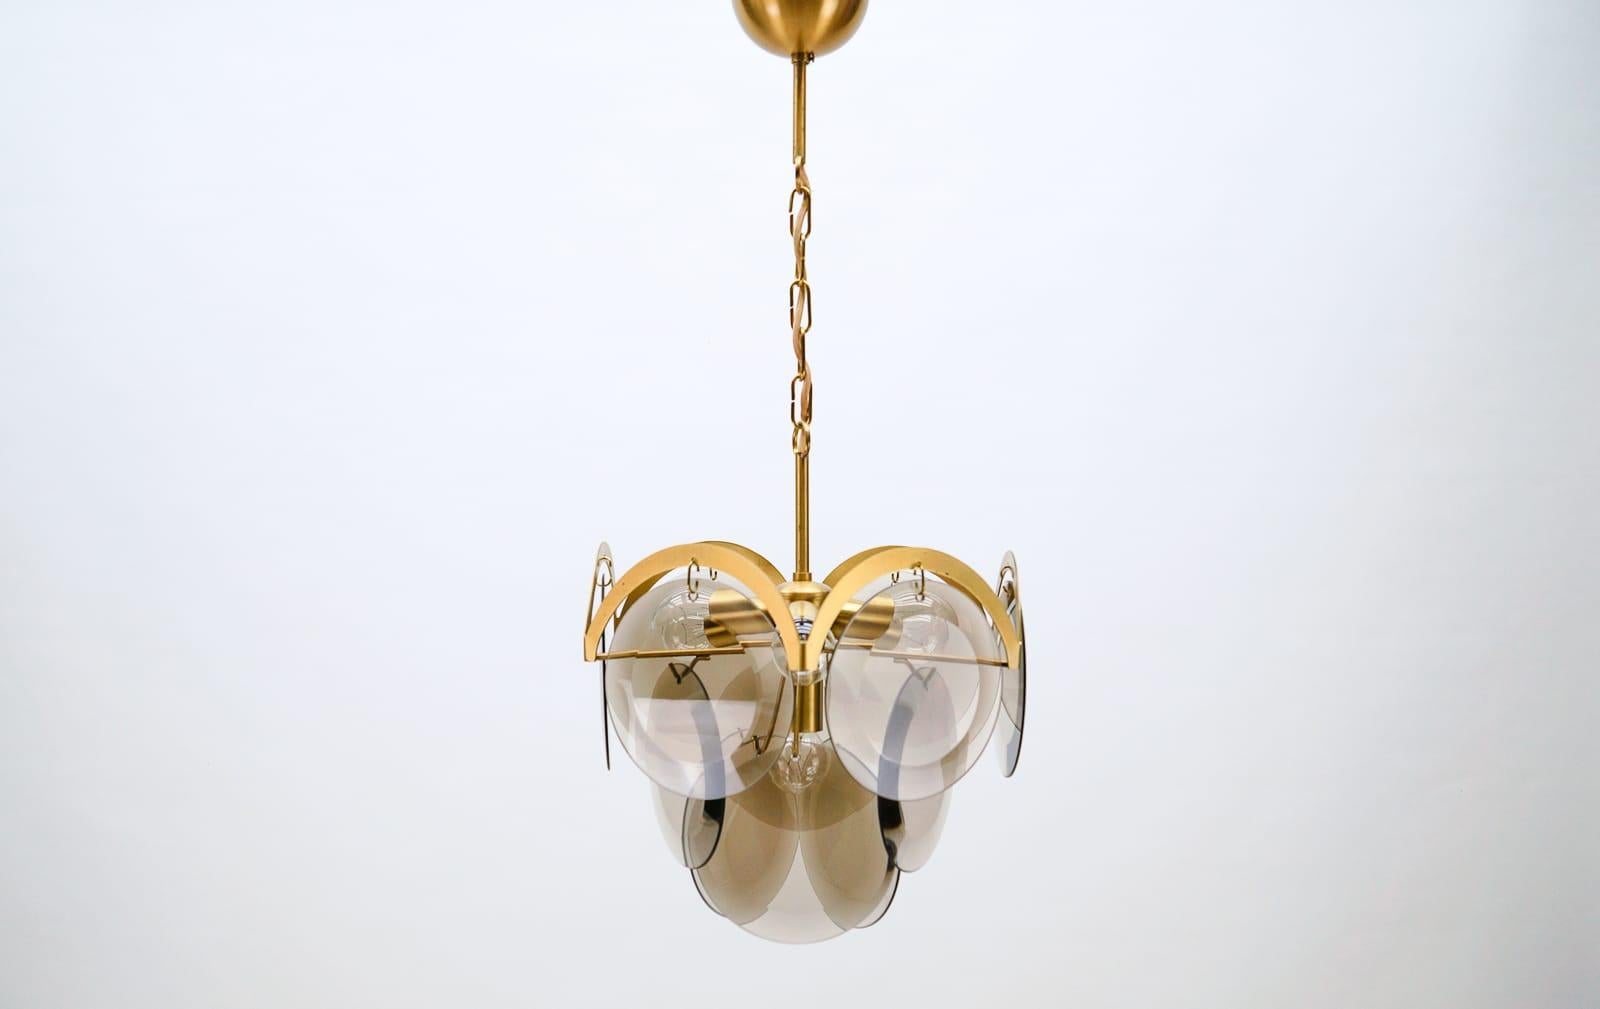 Very Elegant & Delicate Hanging Lamp with Smoked Glass Panes, 1960s Italy For Sale 4